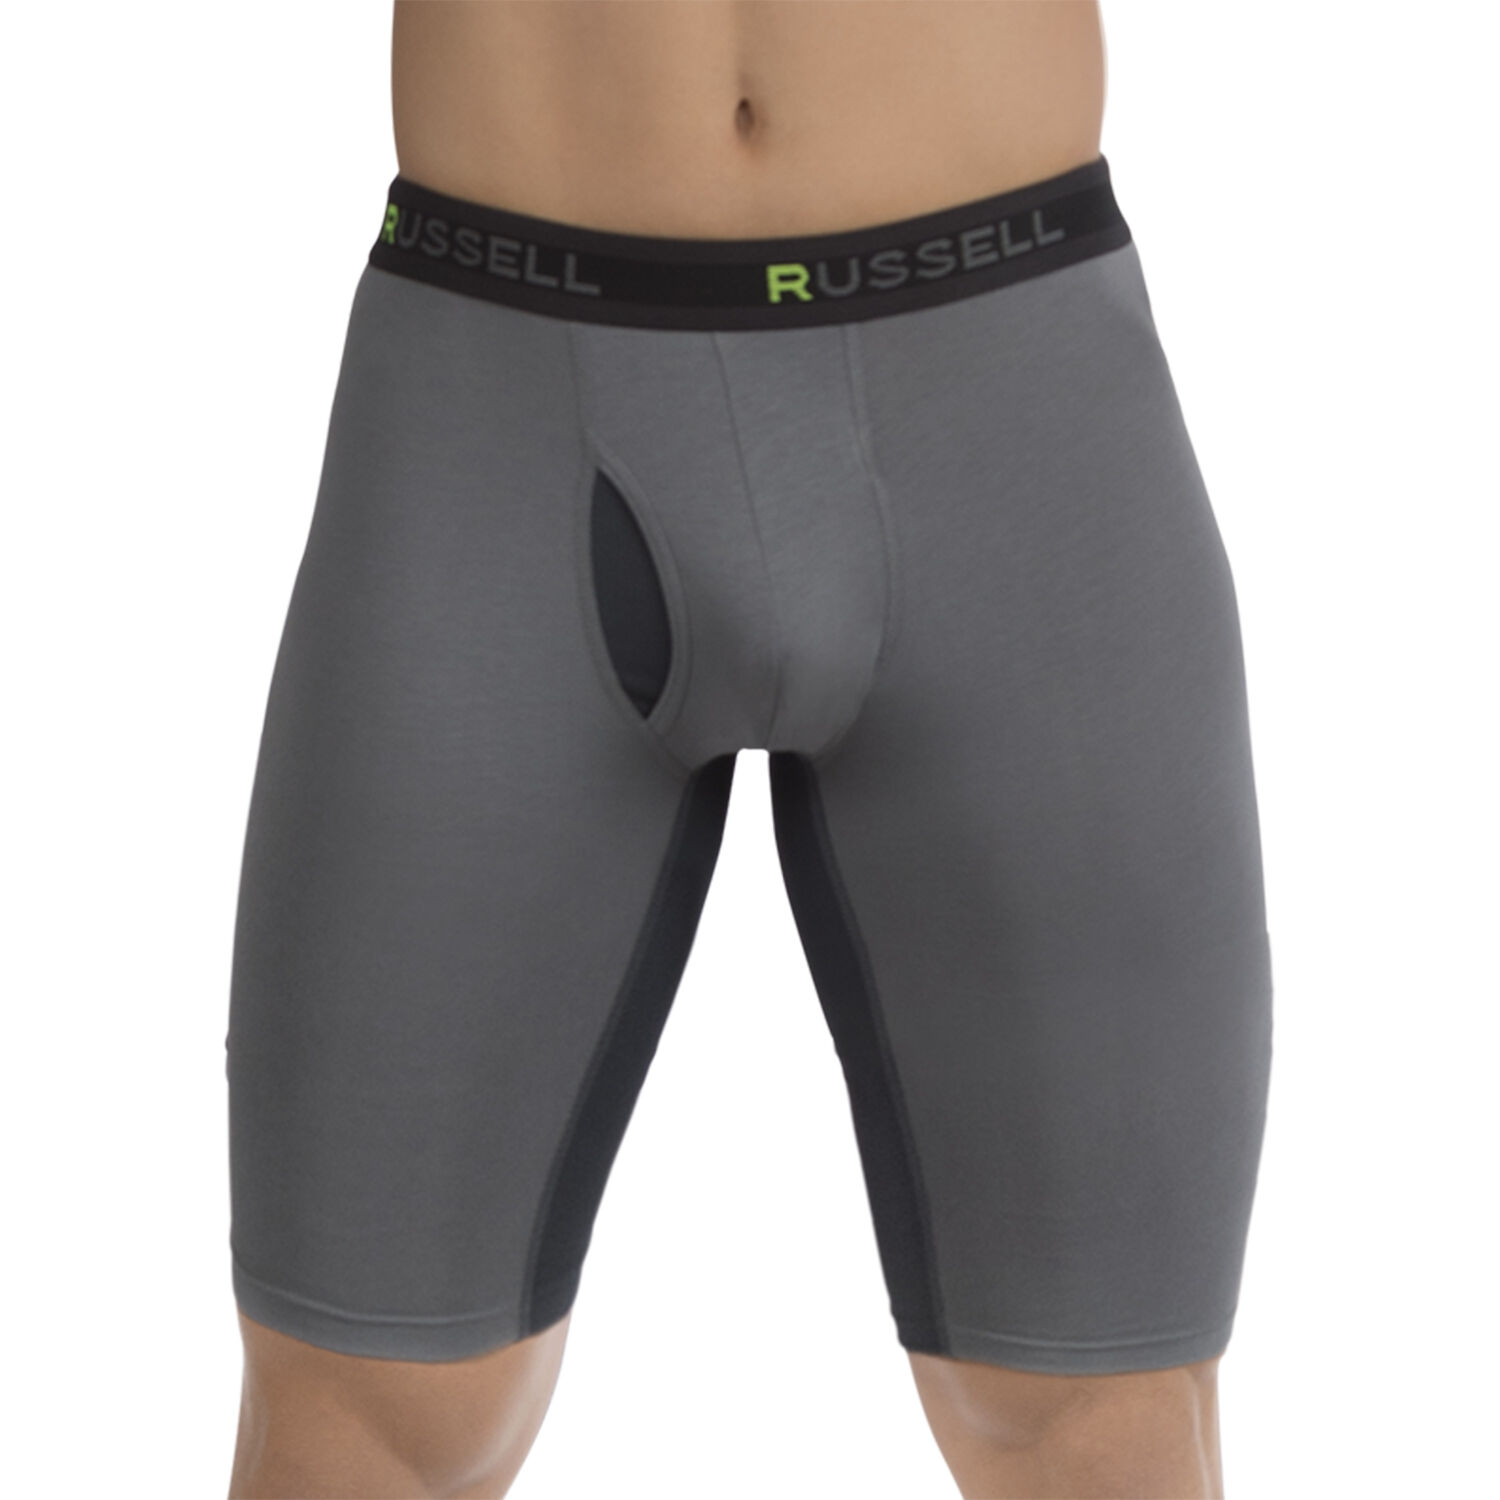 YDKZYMD Mens Boxer Briefs Long Leg Compression Athletic Supporters